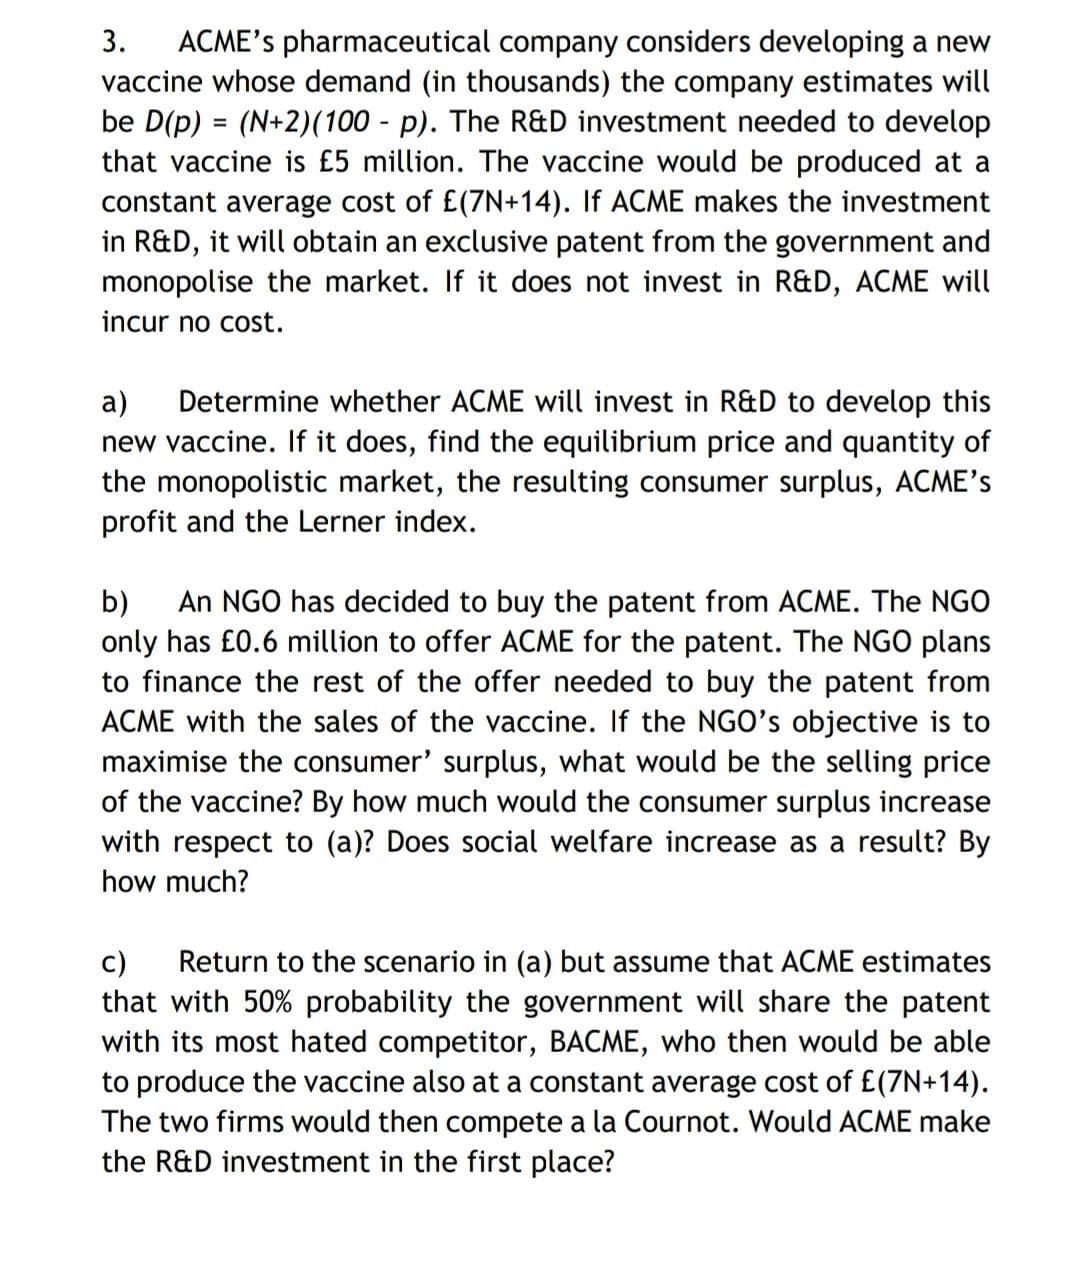 3. ACME's pharmaceutical company considers developing a new
vaccine whose demand (in thousands) the company estimates will
be D(p) = (N+2)(100 - p). The R&D investment needed to develop
that vaccine is £5 million. The vaccine would be produced at a
constant average cost of £(7N+14). If ACME makes the investment
in R&D, it will obtain an exclusive patent from the government and
monopolise the market. If it does not invest in R&D, ACME will
incur no cost.
a) Determine whether ACME will invest in R&D to develop this
new vaccine. If it does, find the equilibrium price and quantity of
the monopolistic market, the resulting consumer surplus, ACME's
profit and the Lerner index.
b) An NGO has decided to buy the patent from ACME. The NGO
only has £0.6 million to offer ACME for the patent. The NGO plans
to finance the rest of the offer needed to buy the patent from
ACME with the sales of the vaccine. If the NGO's objective is to
maximise the consumer' surplus, what would be the selling price
of the vaccine? By how much would the consumer surplus increase
with respect to (a)? Does social welfare increase as a result? By
how much?
c) Return to the scenario in (a) but assume that ACME estimates
that with 50% probability the government will share the patent
with its most hated competitor, BACME, who then would be able
to produce the vaccine also at a constant average cost of £(7N+14).
The two firms would then compete a la Cournot. Would ACME make
the R&D investment in the first place?